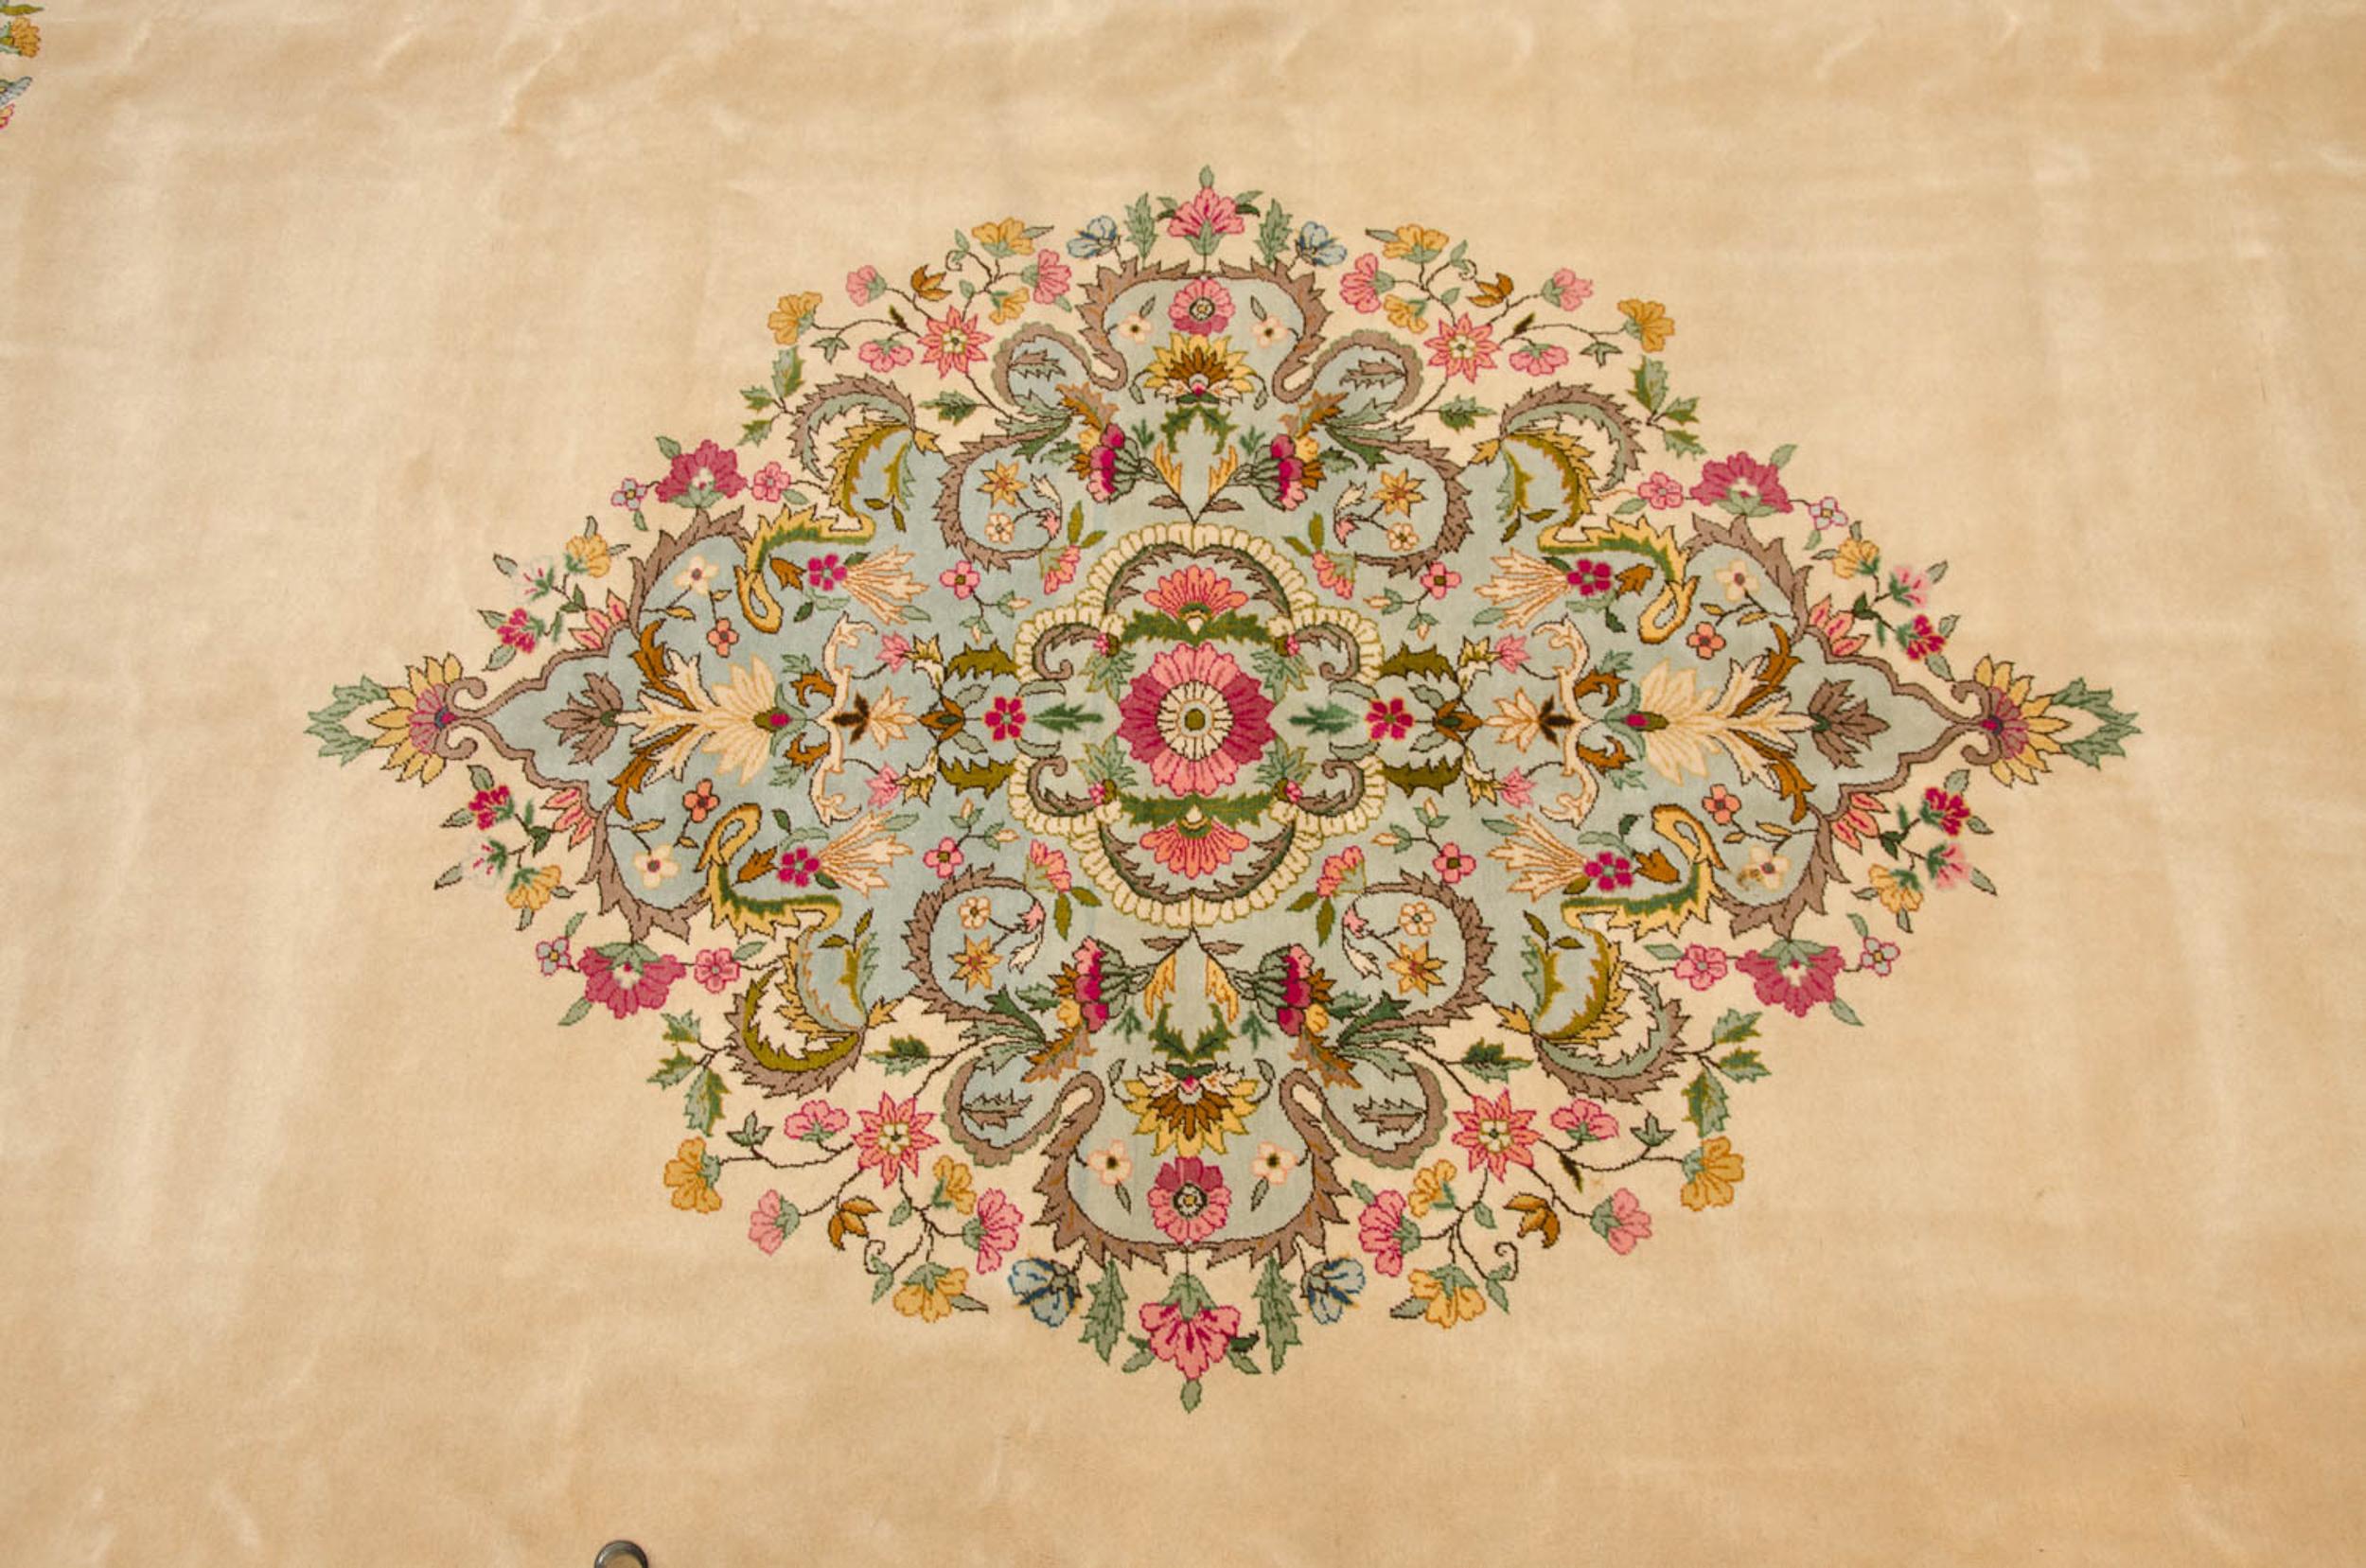 :: Center medallion with ornate densely ornamented enveloped floral buds and blossoms atop an open field with corner spandrel floral sprays inwardly reconciled. Wrapped by a floating inner field overlay in Rococo stylized ribboned and scrolling